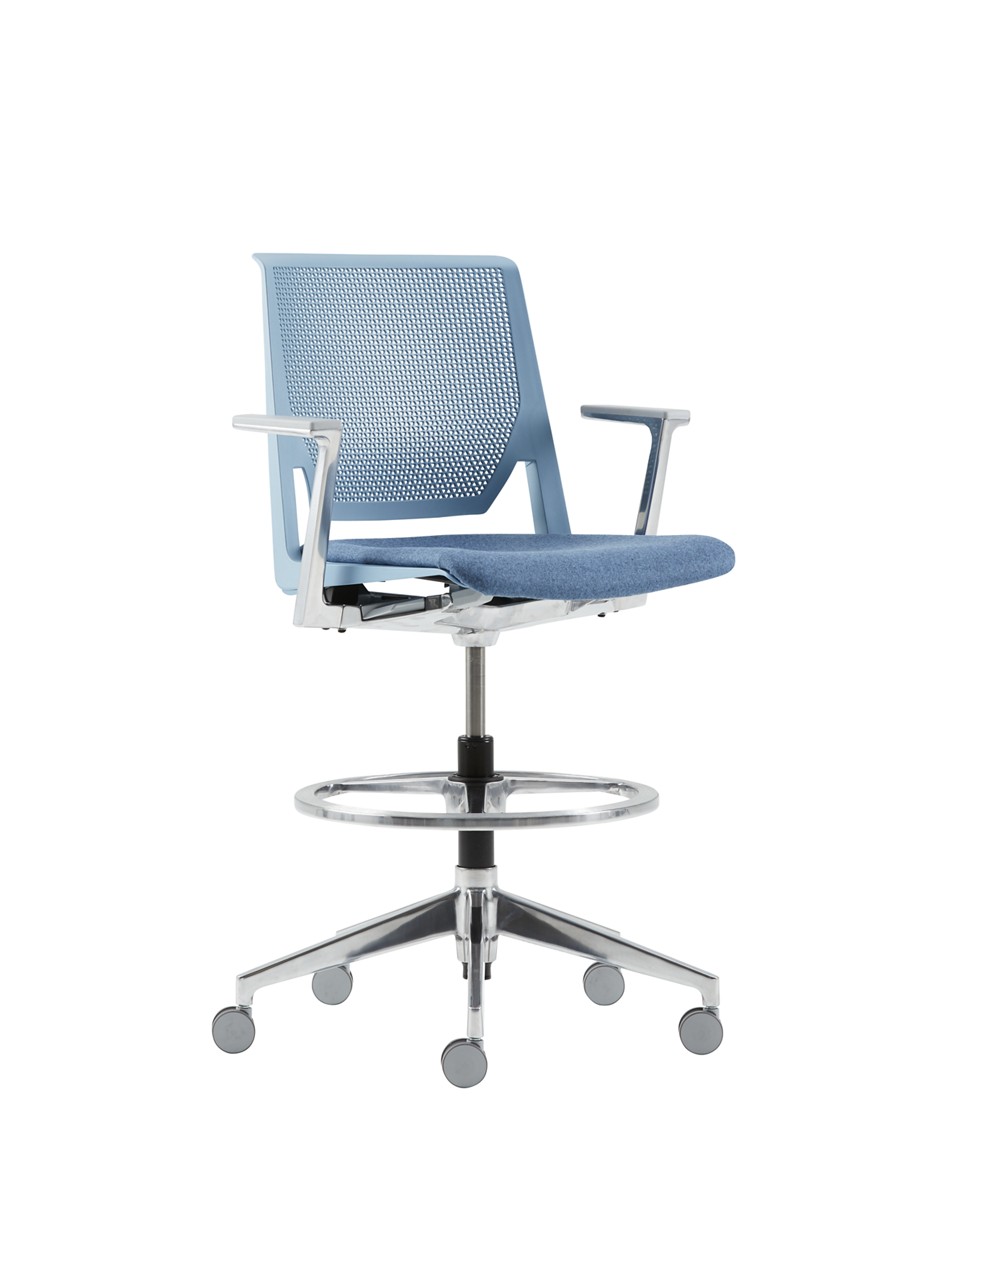 HAWORTH, Seating, Very Stools have built-in intelligence for user comfort. The Very Side and Conference Stools provide